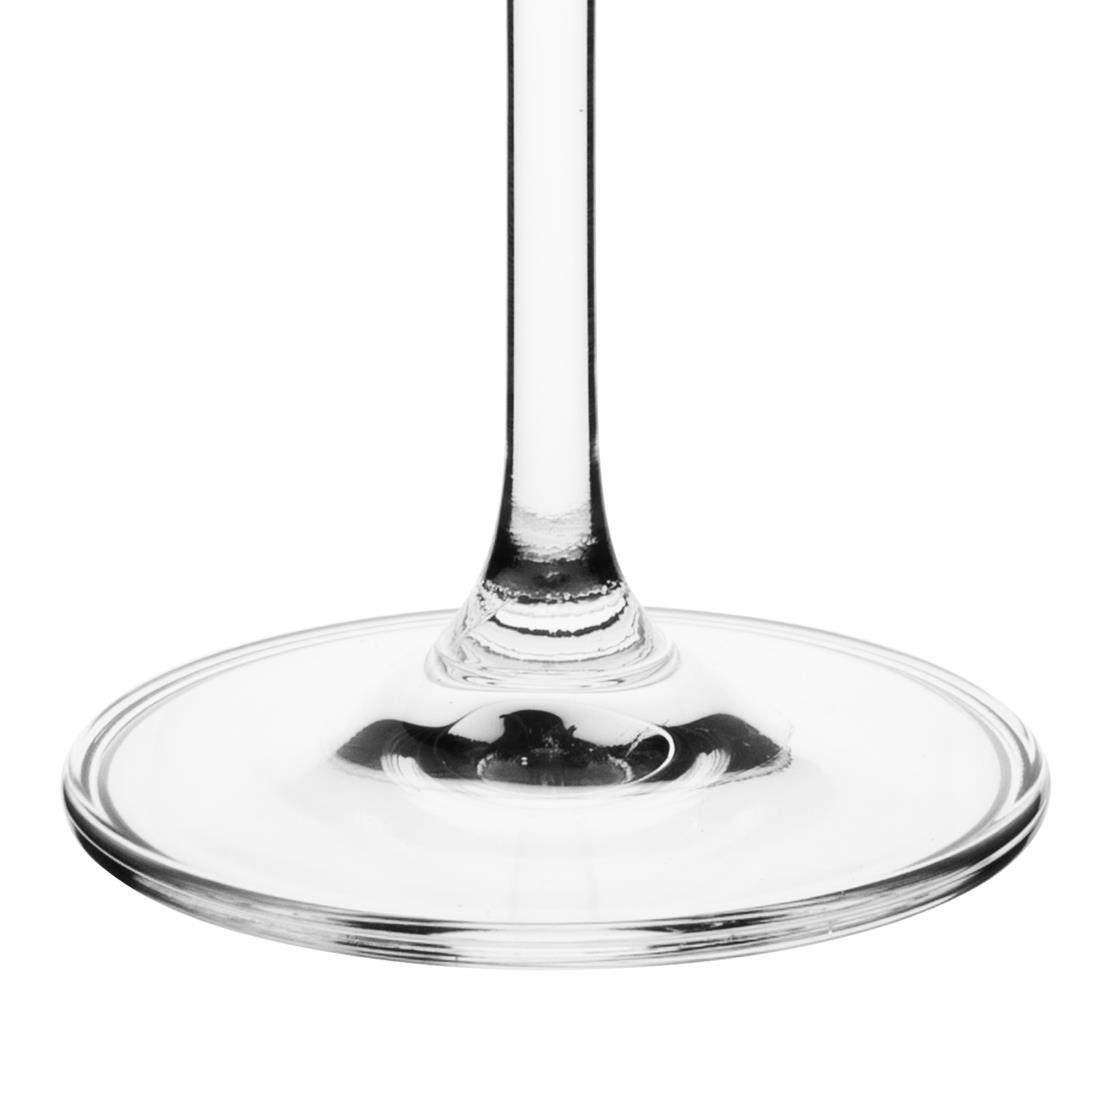 Olympia Chime Crystal Wine Glasses 620ml (Pack of 6) - GF735  - 4